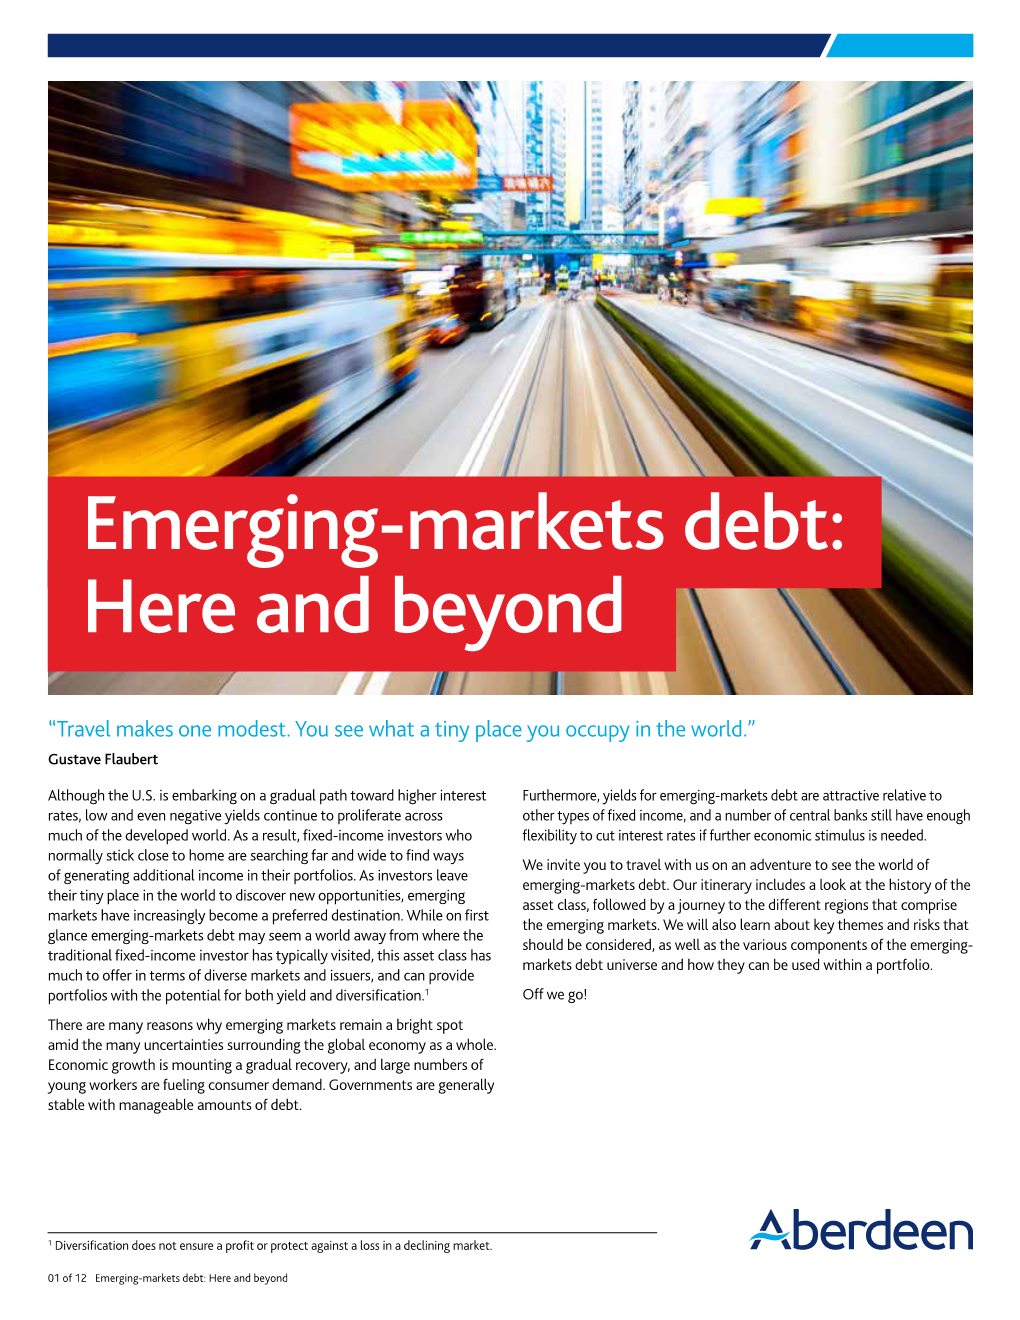 Emerging-Markets Debt: Here and Beyond